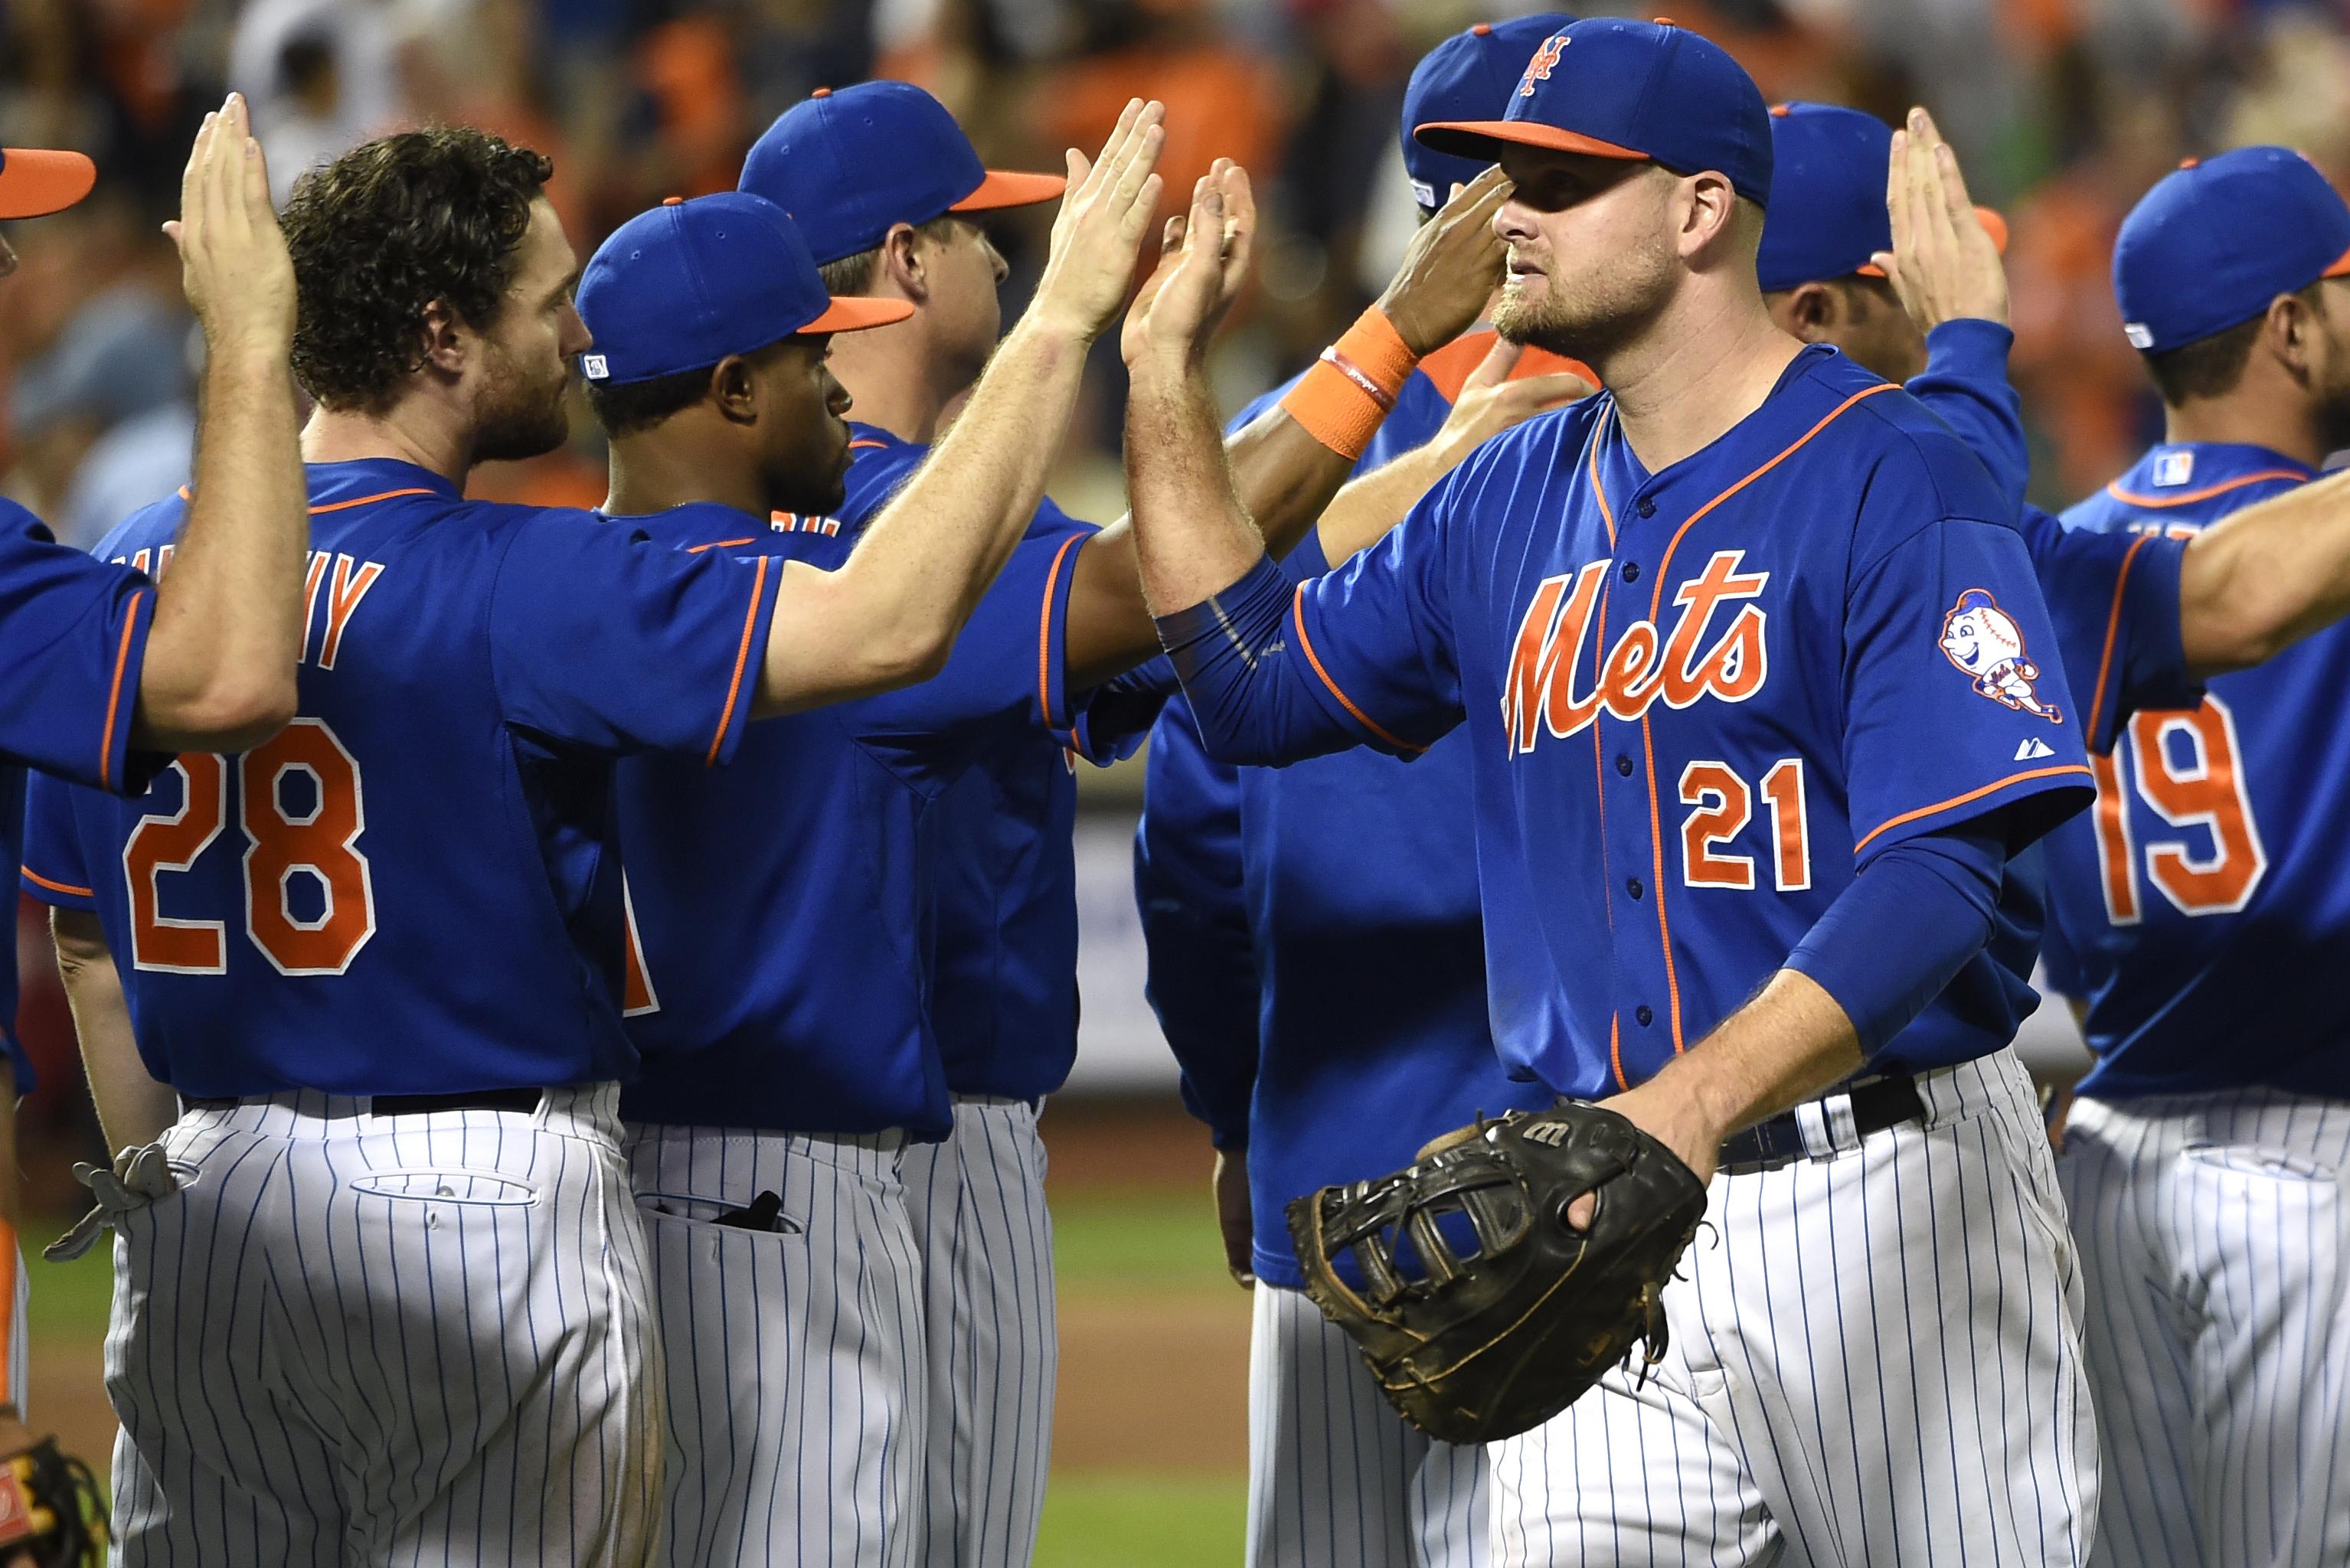 David Wright and the Mets have clinched their first postseason berth since  2006